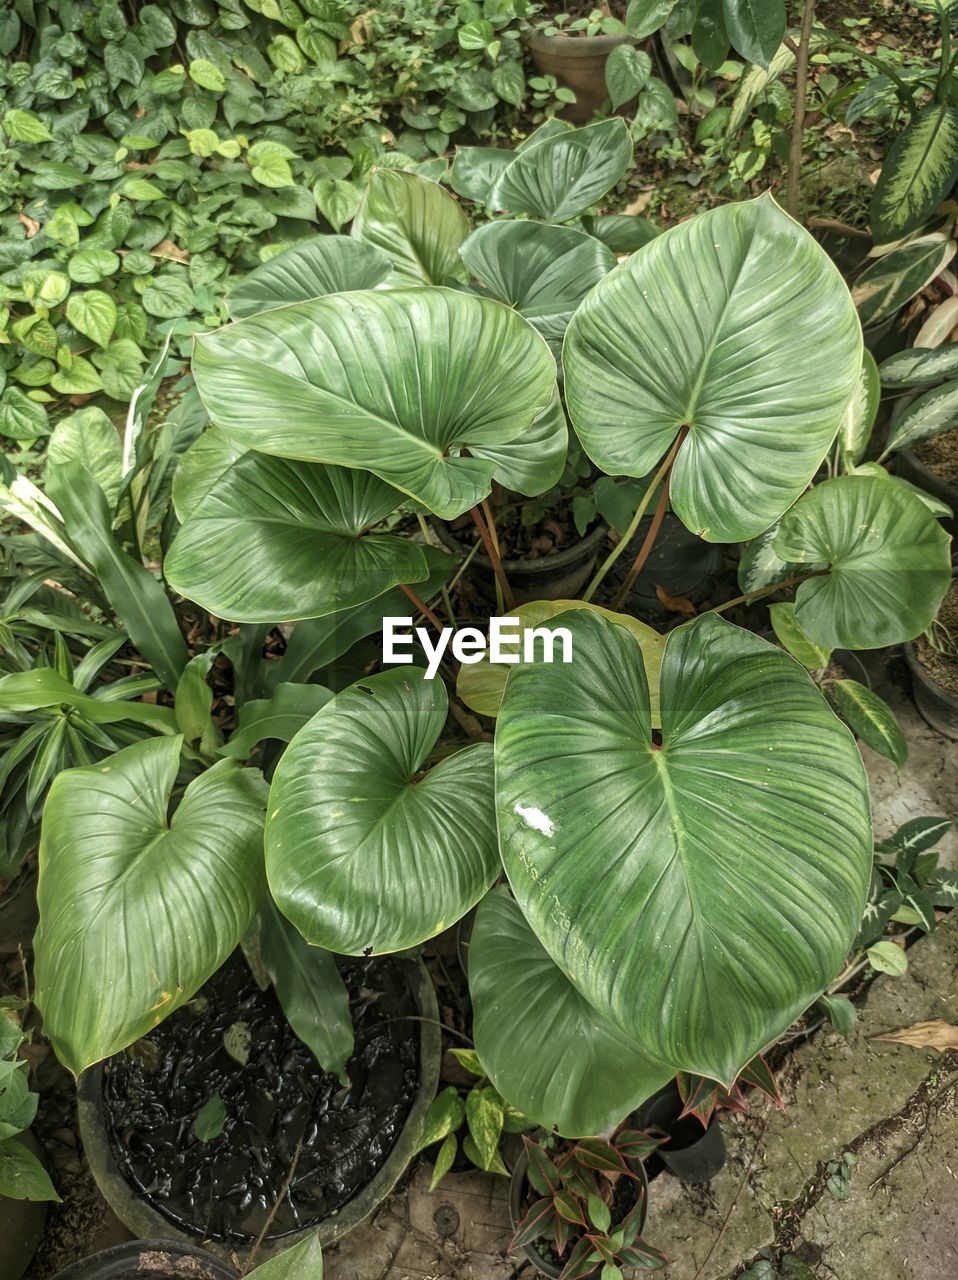 plant, growth, leaf, green, plant part, nature, flower, beauty in nature, high angle view, no people, land, freshness, garden, xanthosoma, field, day, food and drink, food, outdoors, agriculture, vegetable, produce, close-up, botany, healthy eating, tranquility, vegetable garden